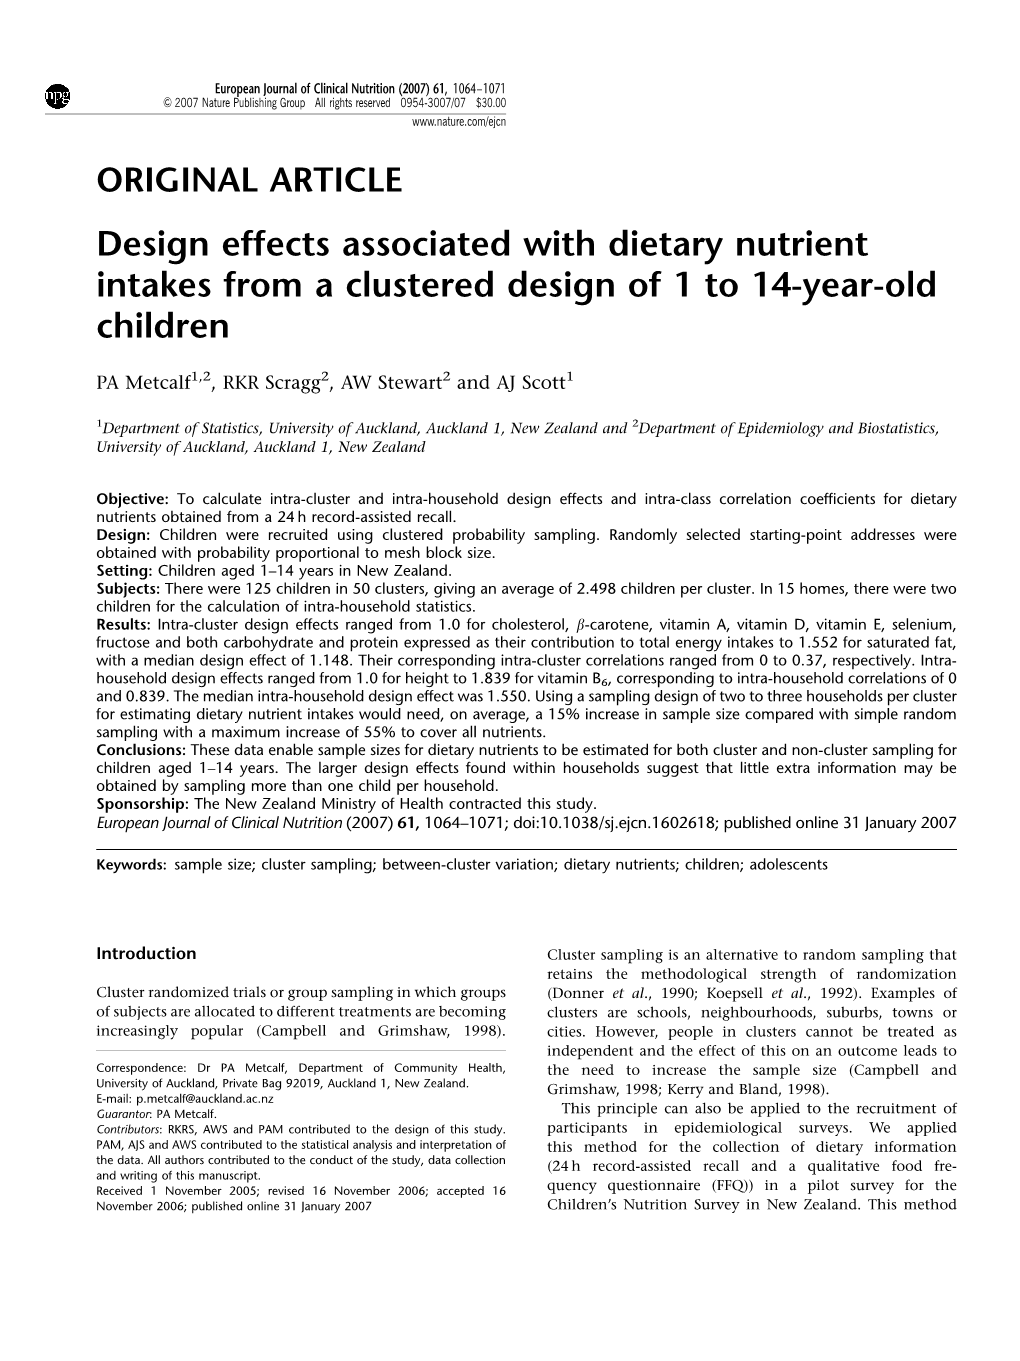 Design Effects Associated with Dietary Nutrient Intakes from a Clustered Design of 1 to 14-Year-Old Children